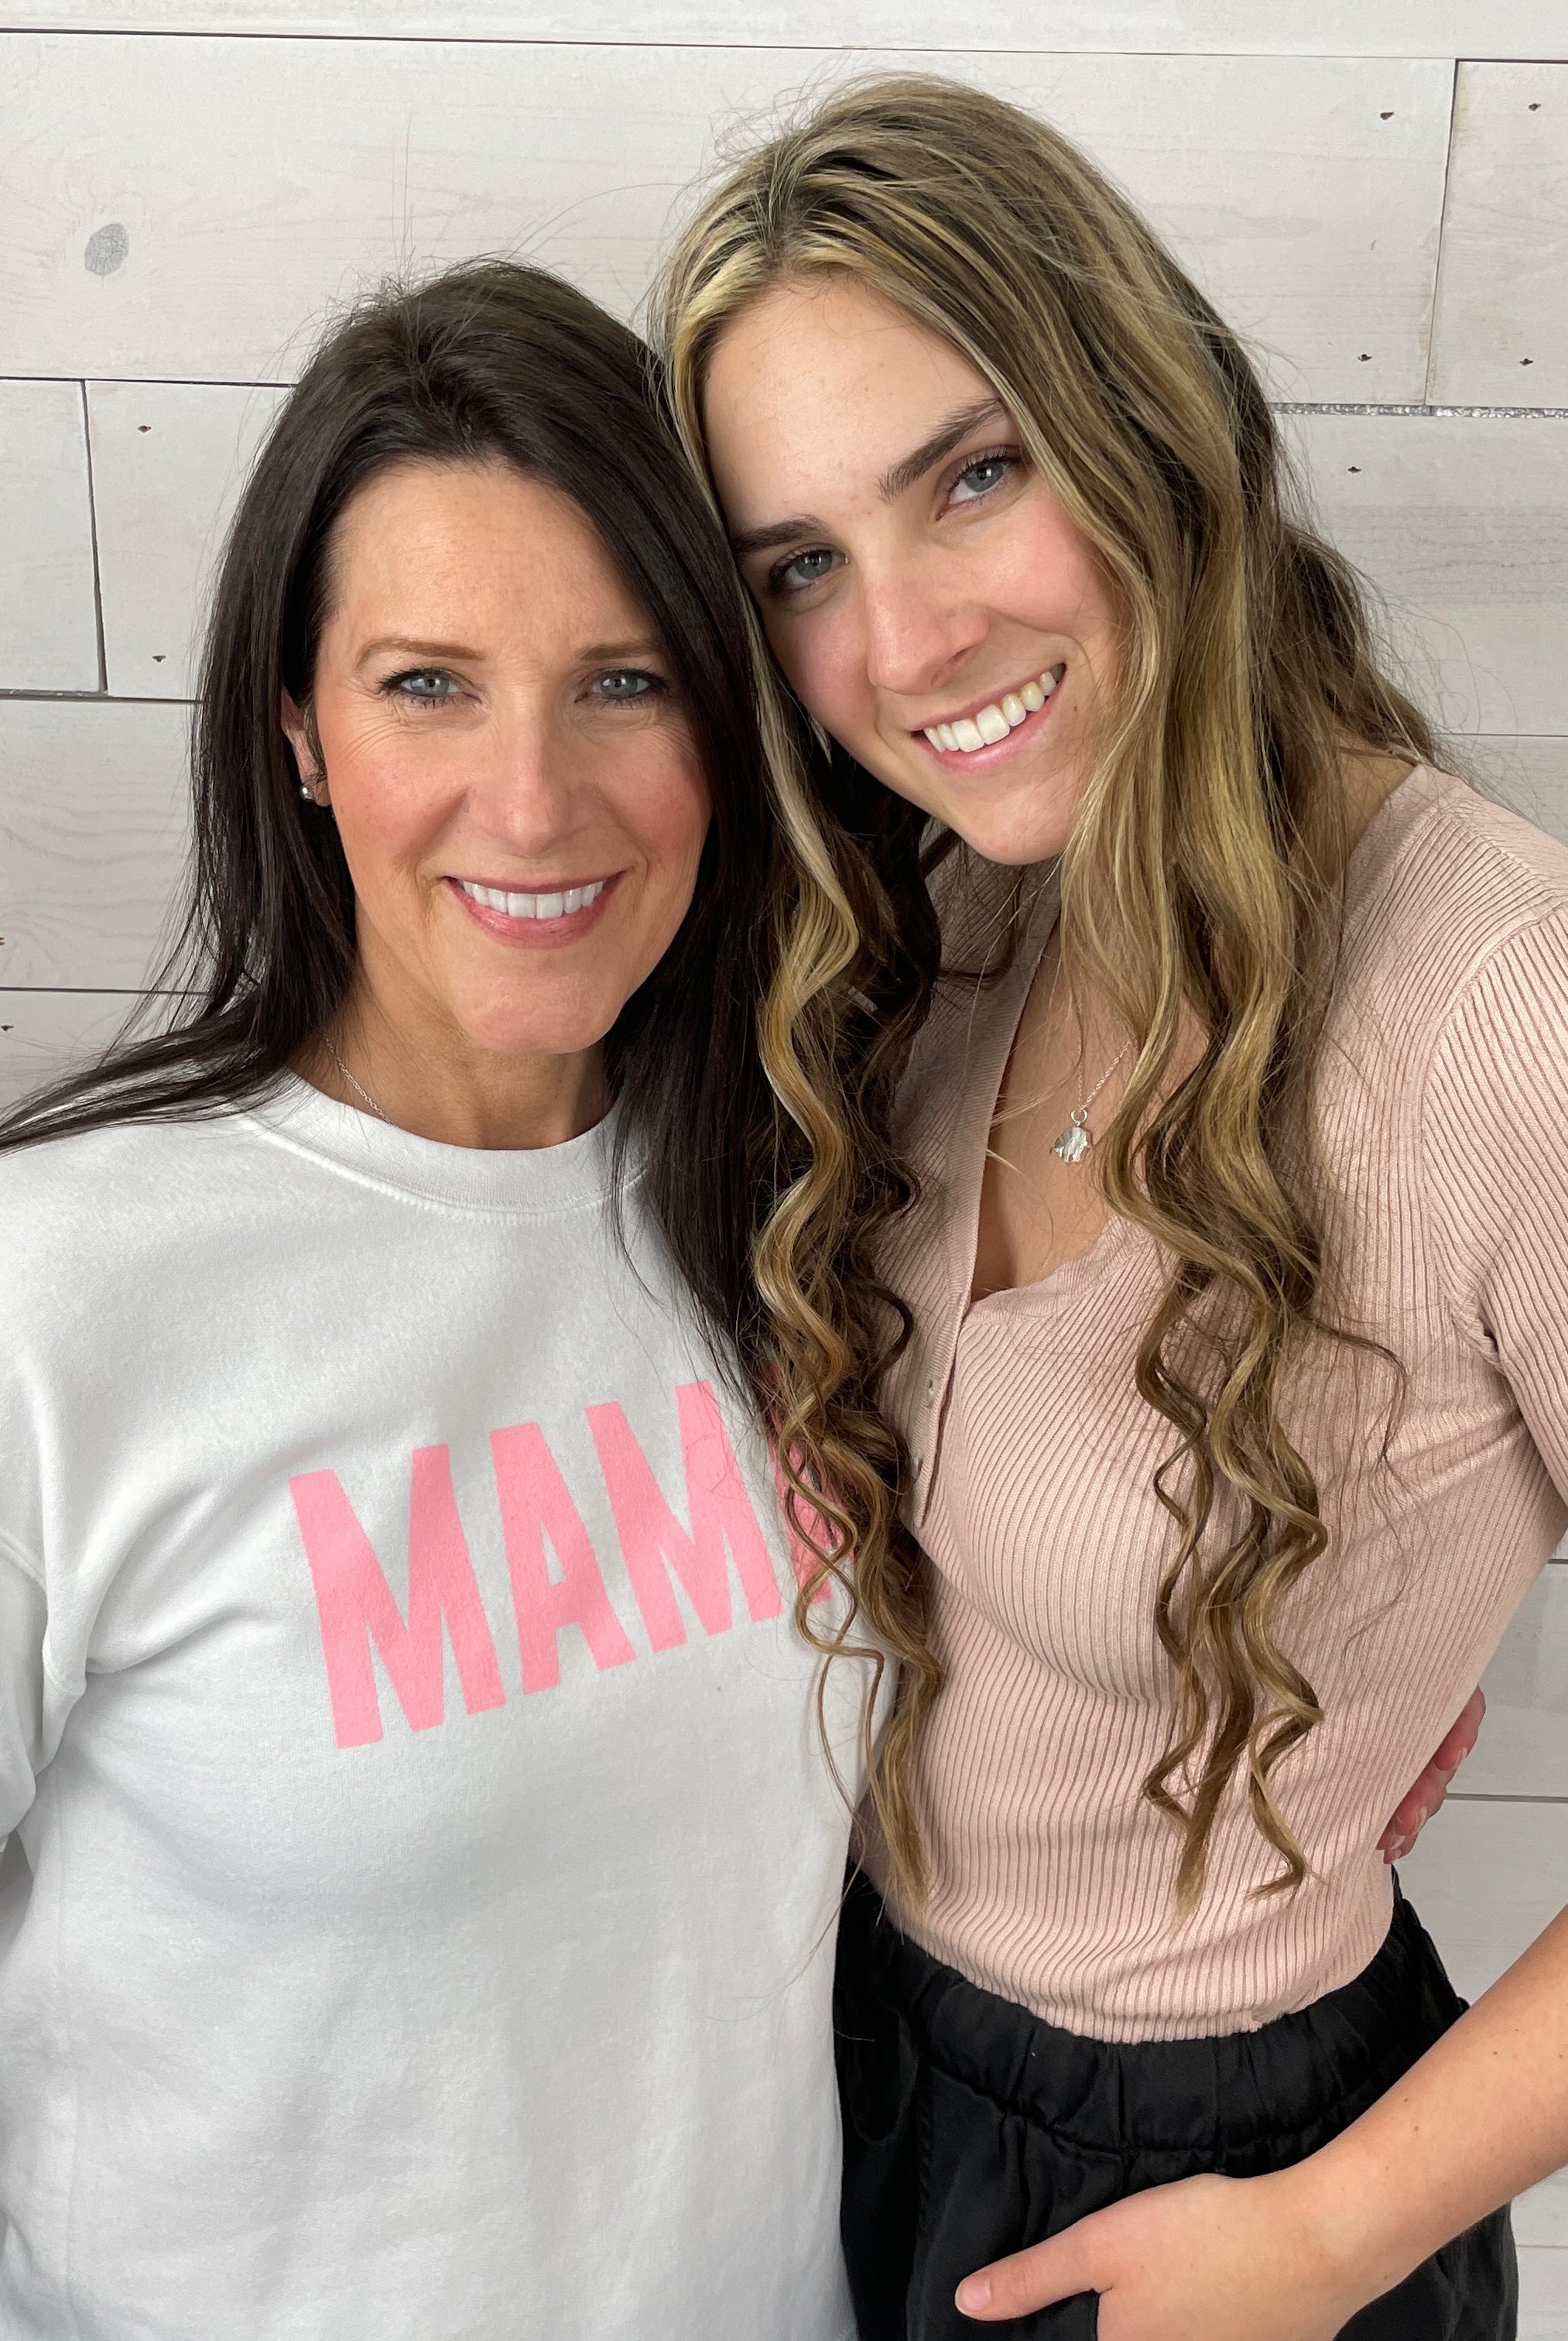 Mama Love Sweatshirt-Loungewear Tops-Vixen Collection, Day Spa and Women's Boutique Located in Seattle, Washington